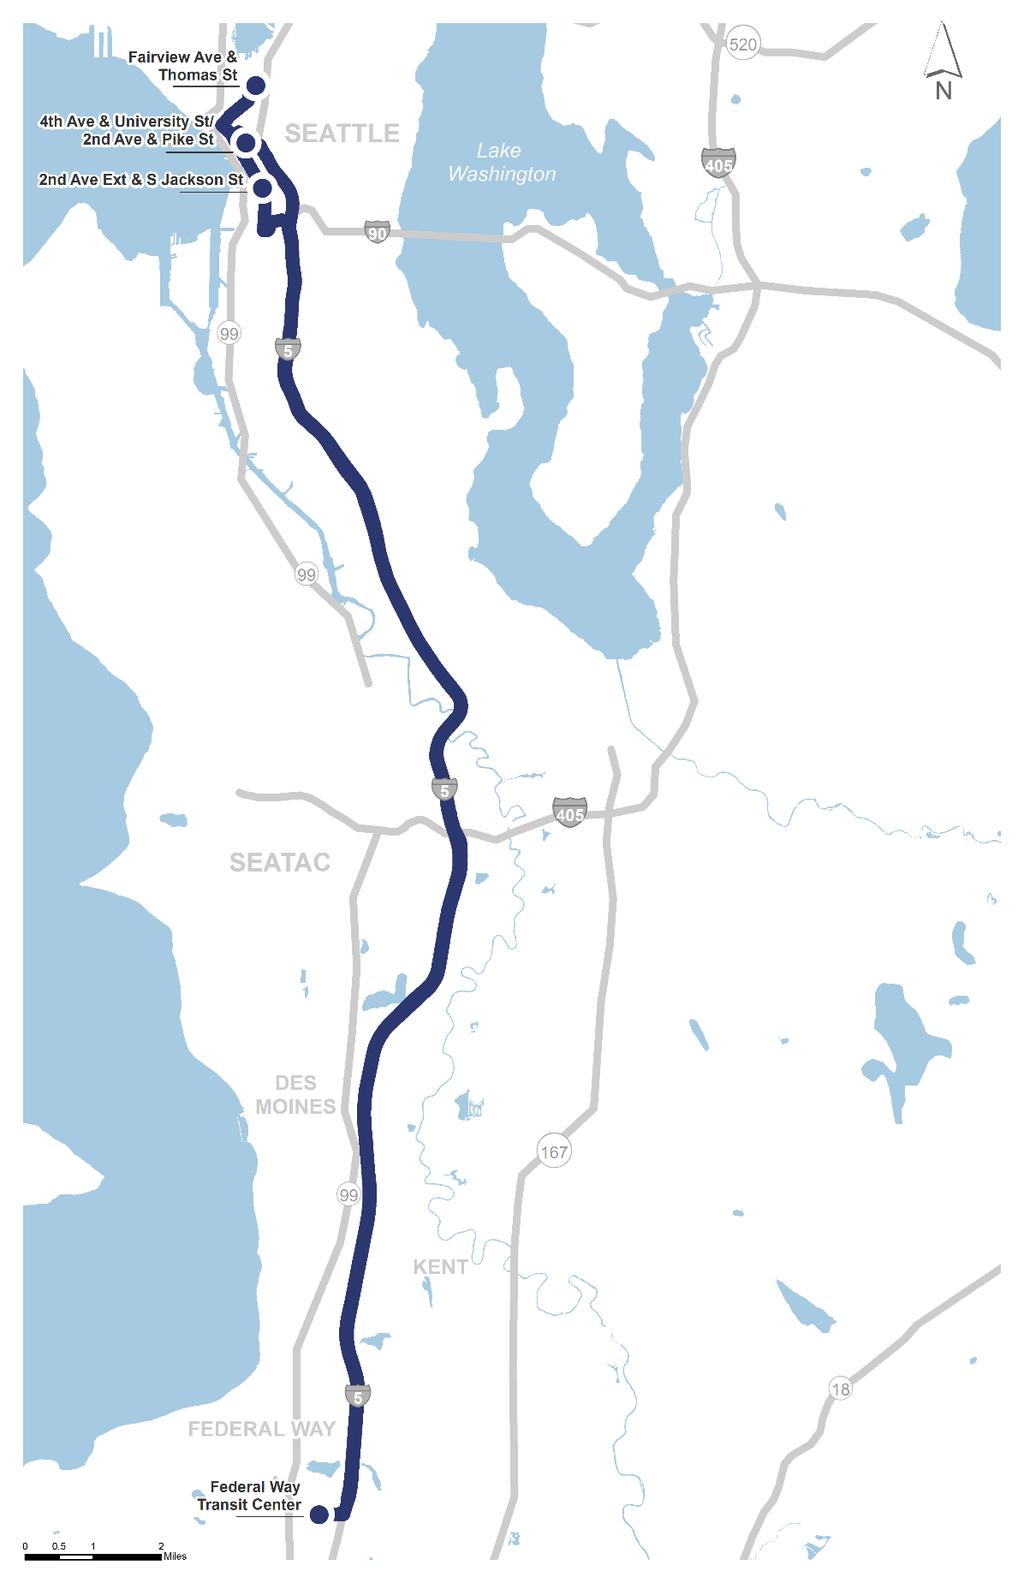 Route 577: Federal Way Seattle I-5 S NORTHBOUND STOPS AVERAGE WEEKDAY ONS OFFS Federal Way Transit Center 913 0 5th Ave & Seneca St 5 383 4th Ave & University St 1 175 Pine St & 3rd Ave 3 262 2nd Ave